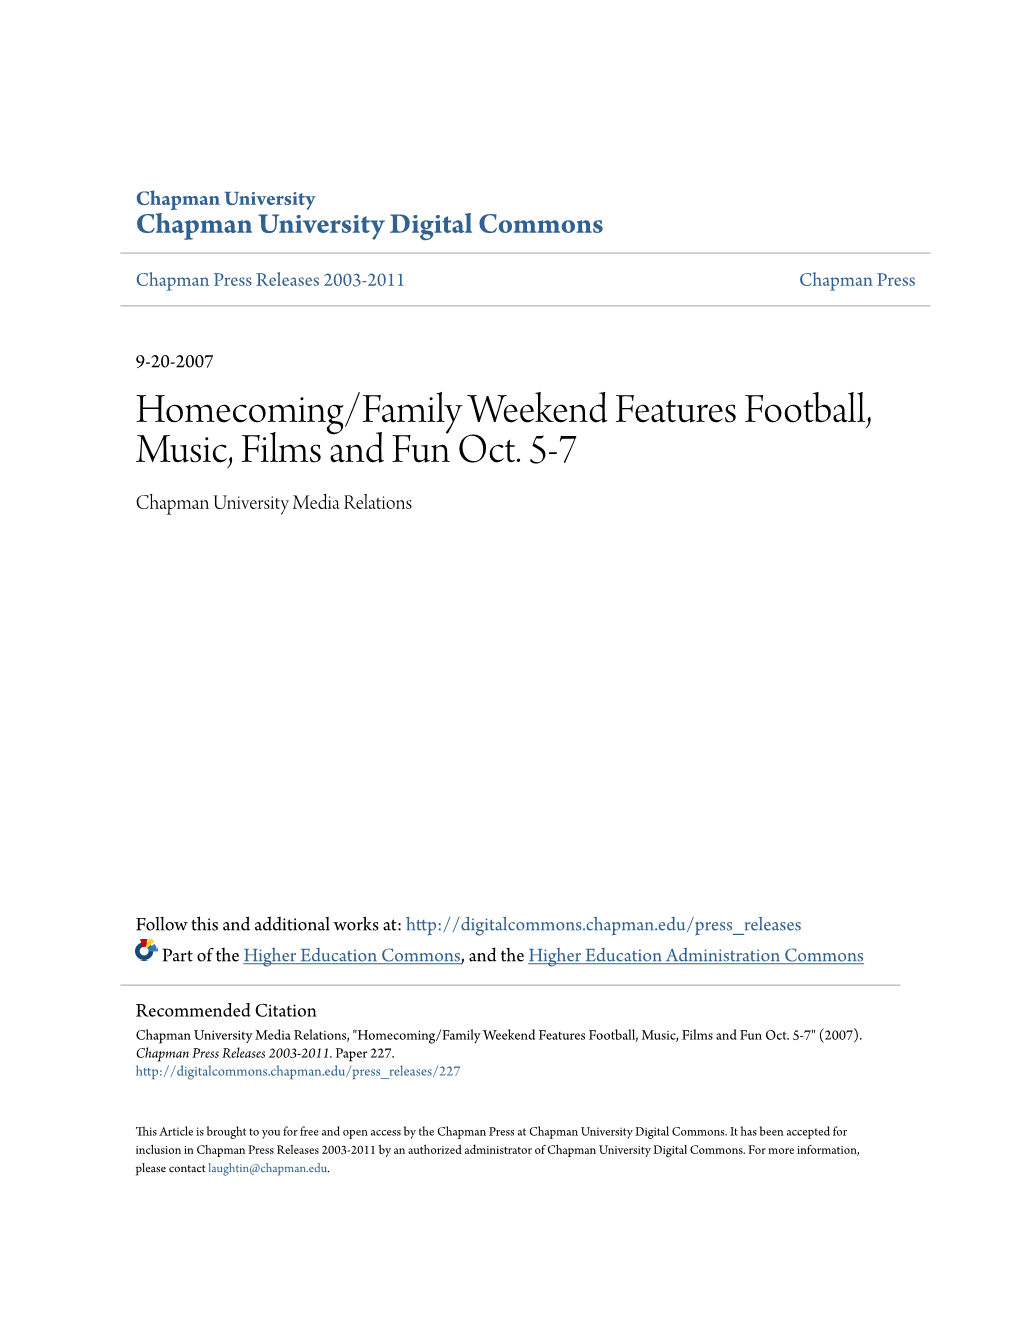 Homecoming/Family Weekend Features Football, Music, Films and Fun Oct